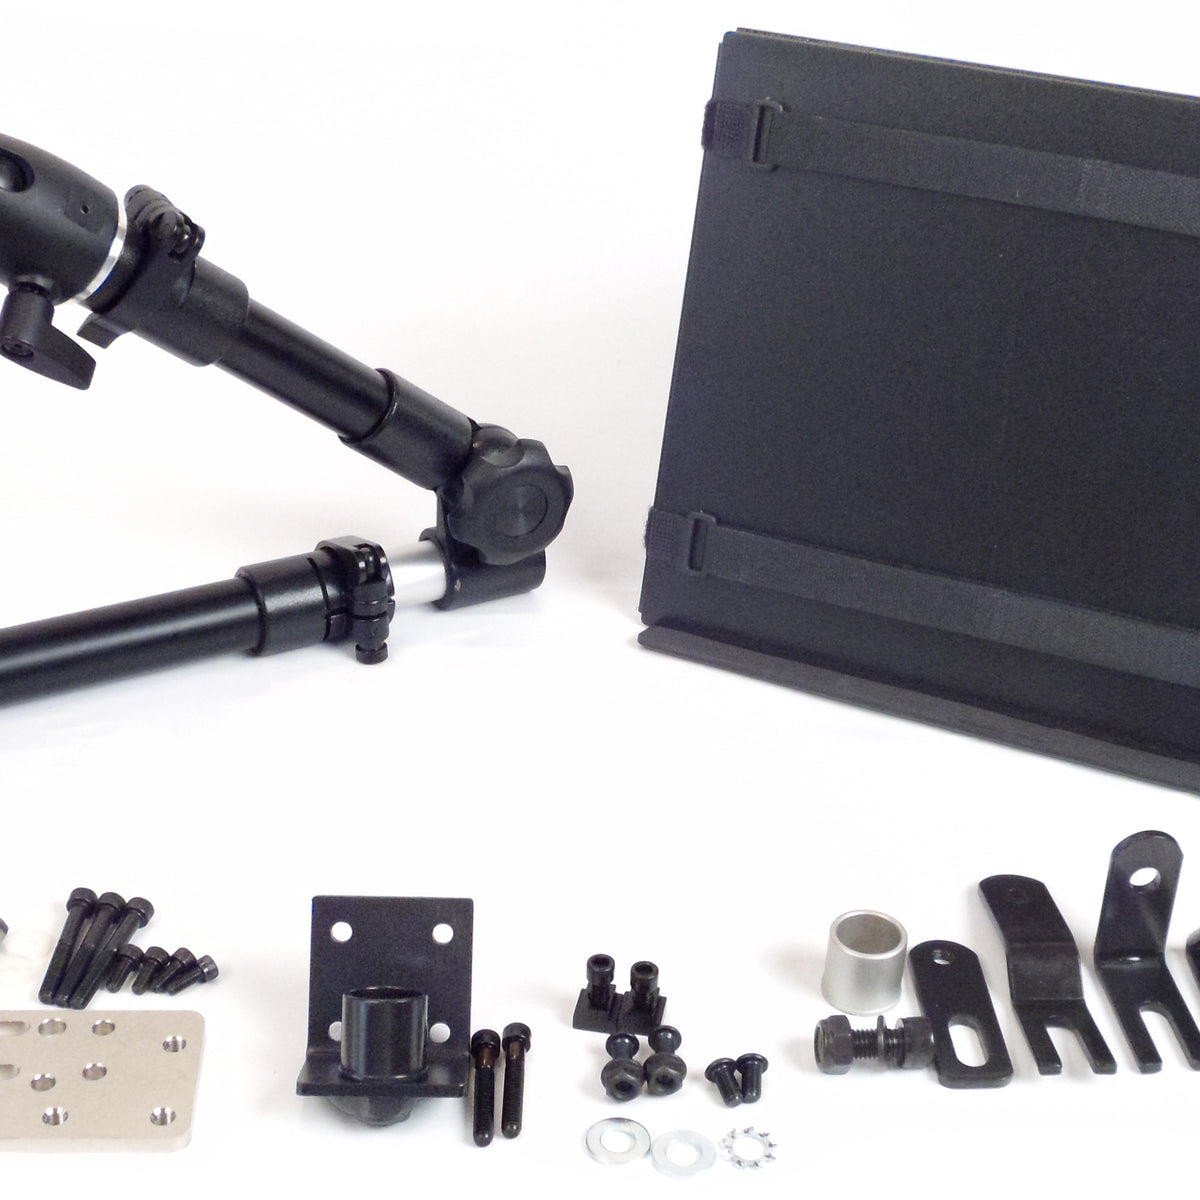 Robo Arm Mount Kit for Wheelchair or Bed